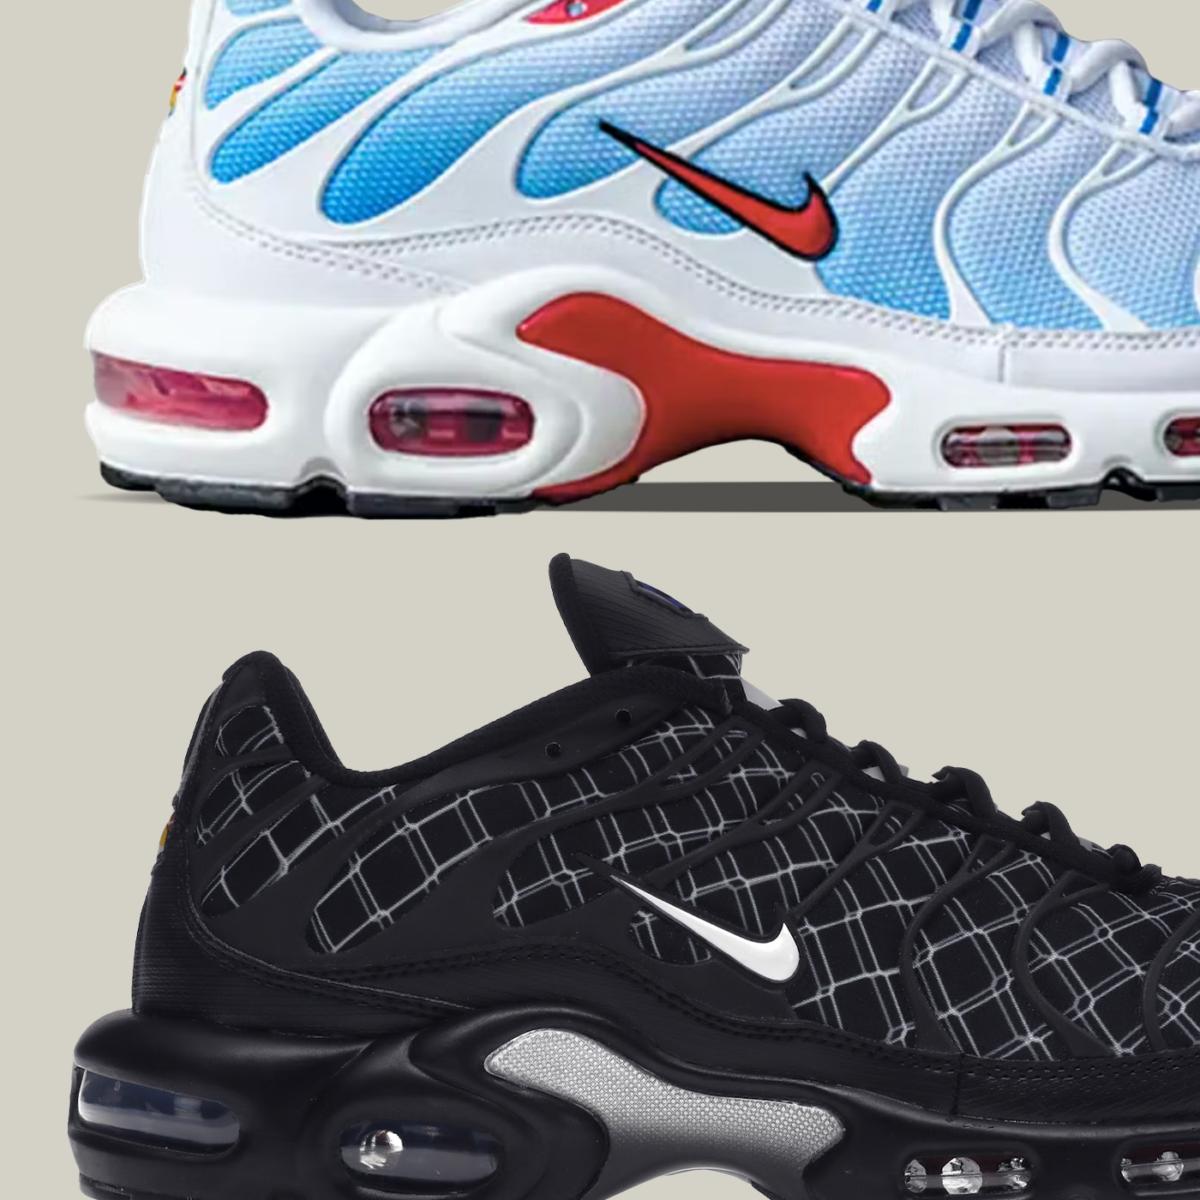 The Best of the Nike Air Max Plus - StockX News